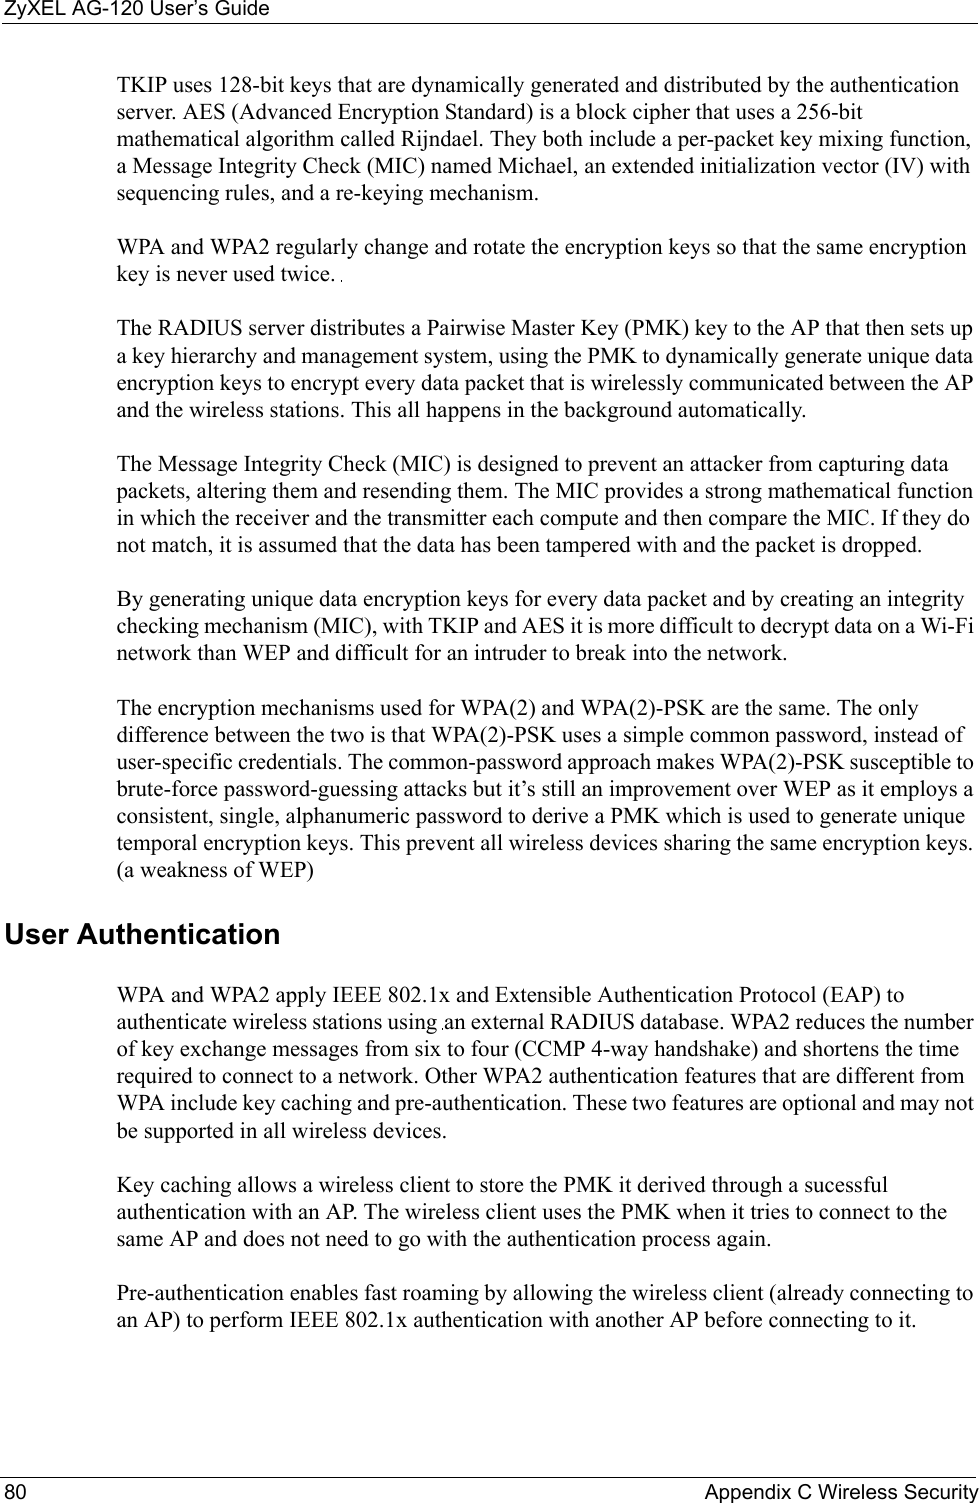 ZyXEL AG-120 User’s Guide80 Appendix C Wireless SecurityTKIP uses 128-bit keys that are dynamically generated and distributed by the authentication server. AES (Advanced Encryption Standard) is a block cipher that uses a 256-bit mathematical algorithm called Rijndael. They both include a per-packet key mixing function, a Message Integrity Check (MIC) named Michael, an extended initialization vector (IV) with sequencing rules, and a re-keying mechanism.WPA and WPA2 regularly change and rotate the encryption keys so that the same encryption key is never used twice. The RADIUS server distributes a Pairwise Master Key (PMK) key to the AP that then sets up a key hierarchy and management system, using the PMK to dynamically generate unique data encryption keys to encrypt every data packet that is wirelessly communicated between the AP and the wireless stations. This all happens in the background automatically.The Message Integrity Check (MIC) is designed to prevent an attacker from capturing data packets, altering them and resending them. The MIC provides a strong mathematical function in which the receiver and the transmitter each compute and then compare the MIC. If they do not match, it is assumed that the data has been tampered with and the packet is dropped. By generating unique data encryption keys for every data packet and by creating an integrity checking mechanism (MIC), with TKIP and AES it is more difficult to decrypt data on a Wi-Fi network than WEP and difficult for an intruder to break into the network. The encryption mechanisms used for WPA(2) and WPA(2)-PSK are the same. The only difference between the two is that WPA(2)-PSK uses a simple common password, instead of user-specific credentials. The common-password approach makes WPA(2)-PSK susceptible to brute-force password-guessing attacks but it’s still an improvement over WEP as it employs a consistent, single, alphanumeric password to derive a PMK which is used to generate unique temporal encryption keys. This prevent all wireless devices sharing the same encryption keys. (a weakness of WEP)User Authentication WPA and WPA2 apply IEEE 802.1x and Extensible Authentication Protocol (EAP) to authenticate wireless stations using an external RADIUS database. WPA2 reduces the number of key exchange messages from six to four (CCMP 4-way handshake) and shortens the time required to connect to a network. Other WPA2 authentication features that are different from WPA include key caching and pre-authentication. These two features are optional and may not be supported in all wireless devices.Key caching allows a wireless client to store the PMK it derived through a sucessful authentication with an AP. The wireless client uses the PMK when it tries to connect to the same AP and does not need to go with the authentication process again.Pre-authentication enables fast roaming by allowing the wireless client (already connecting to an AP) to perform IEEE 802.1x authentication with another AP before connecting to it.